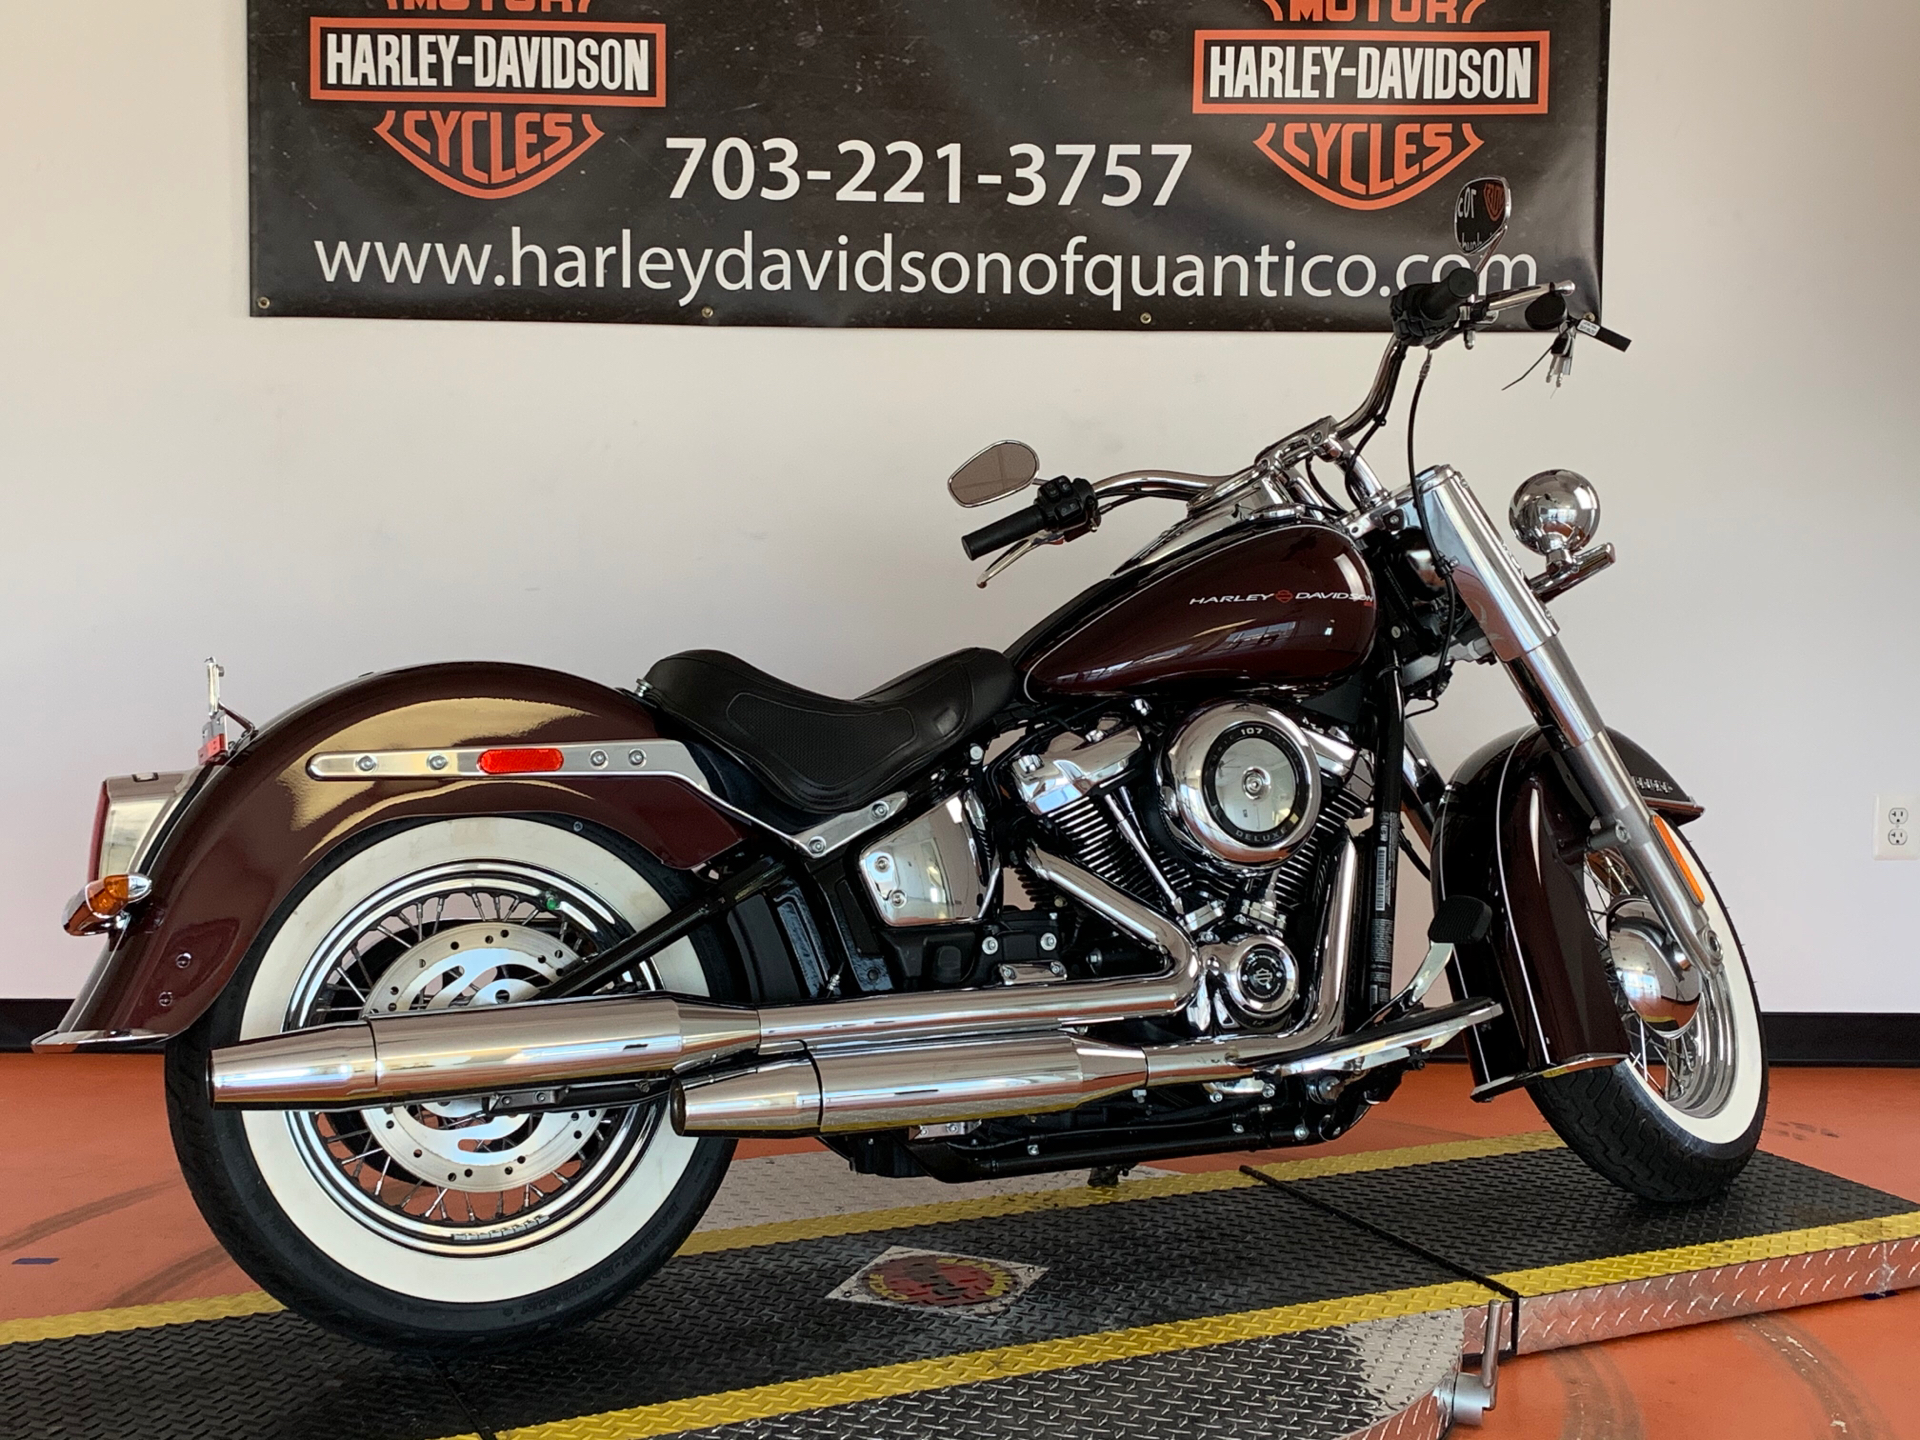 Used 2018 Harley Davidson Softail Deluxe 107 Twisted Cherry Motorcycles In Orange Va 080842